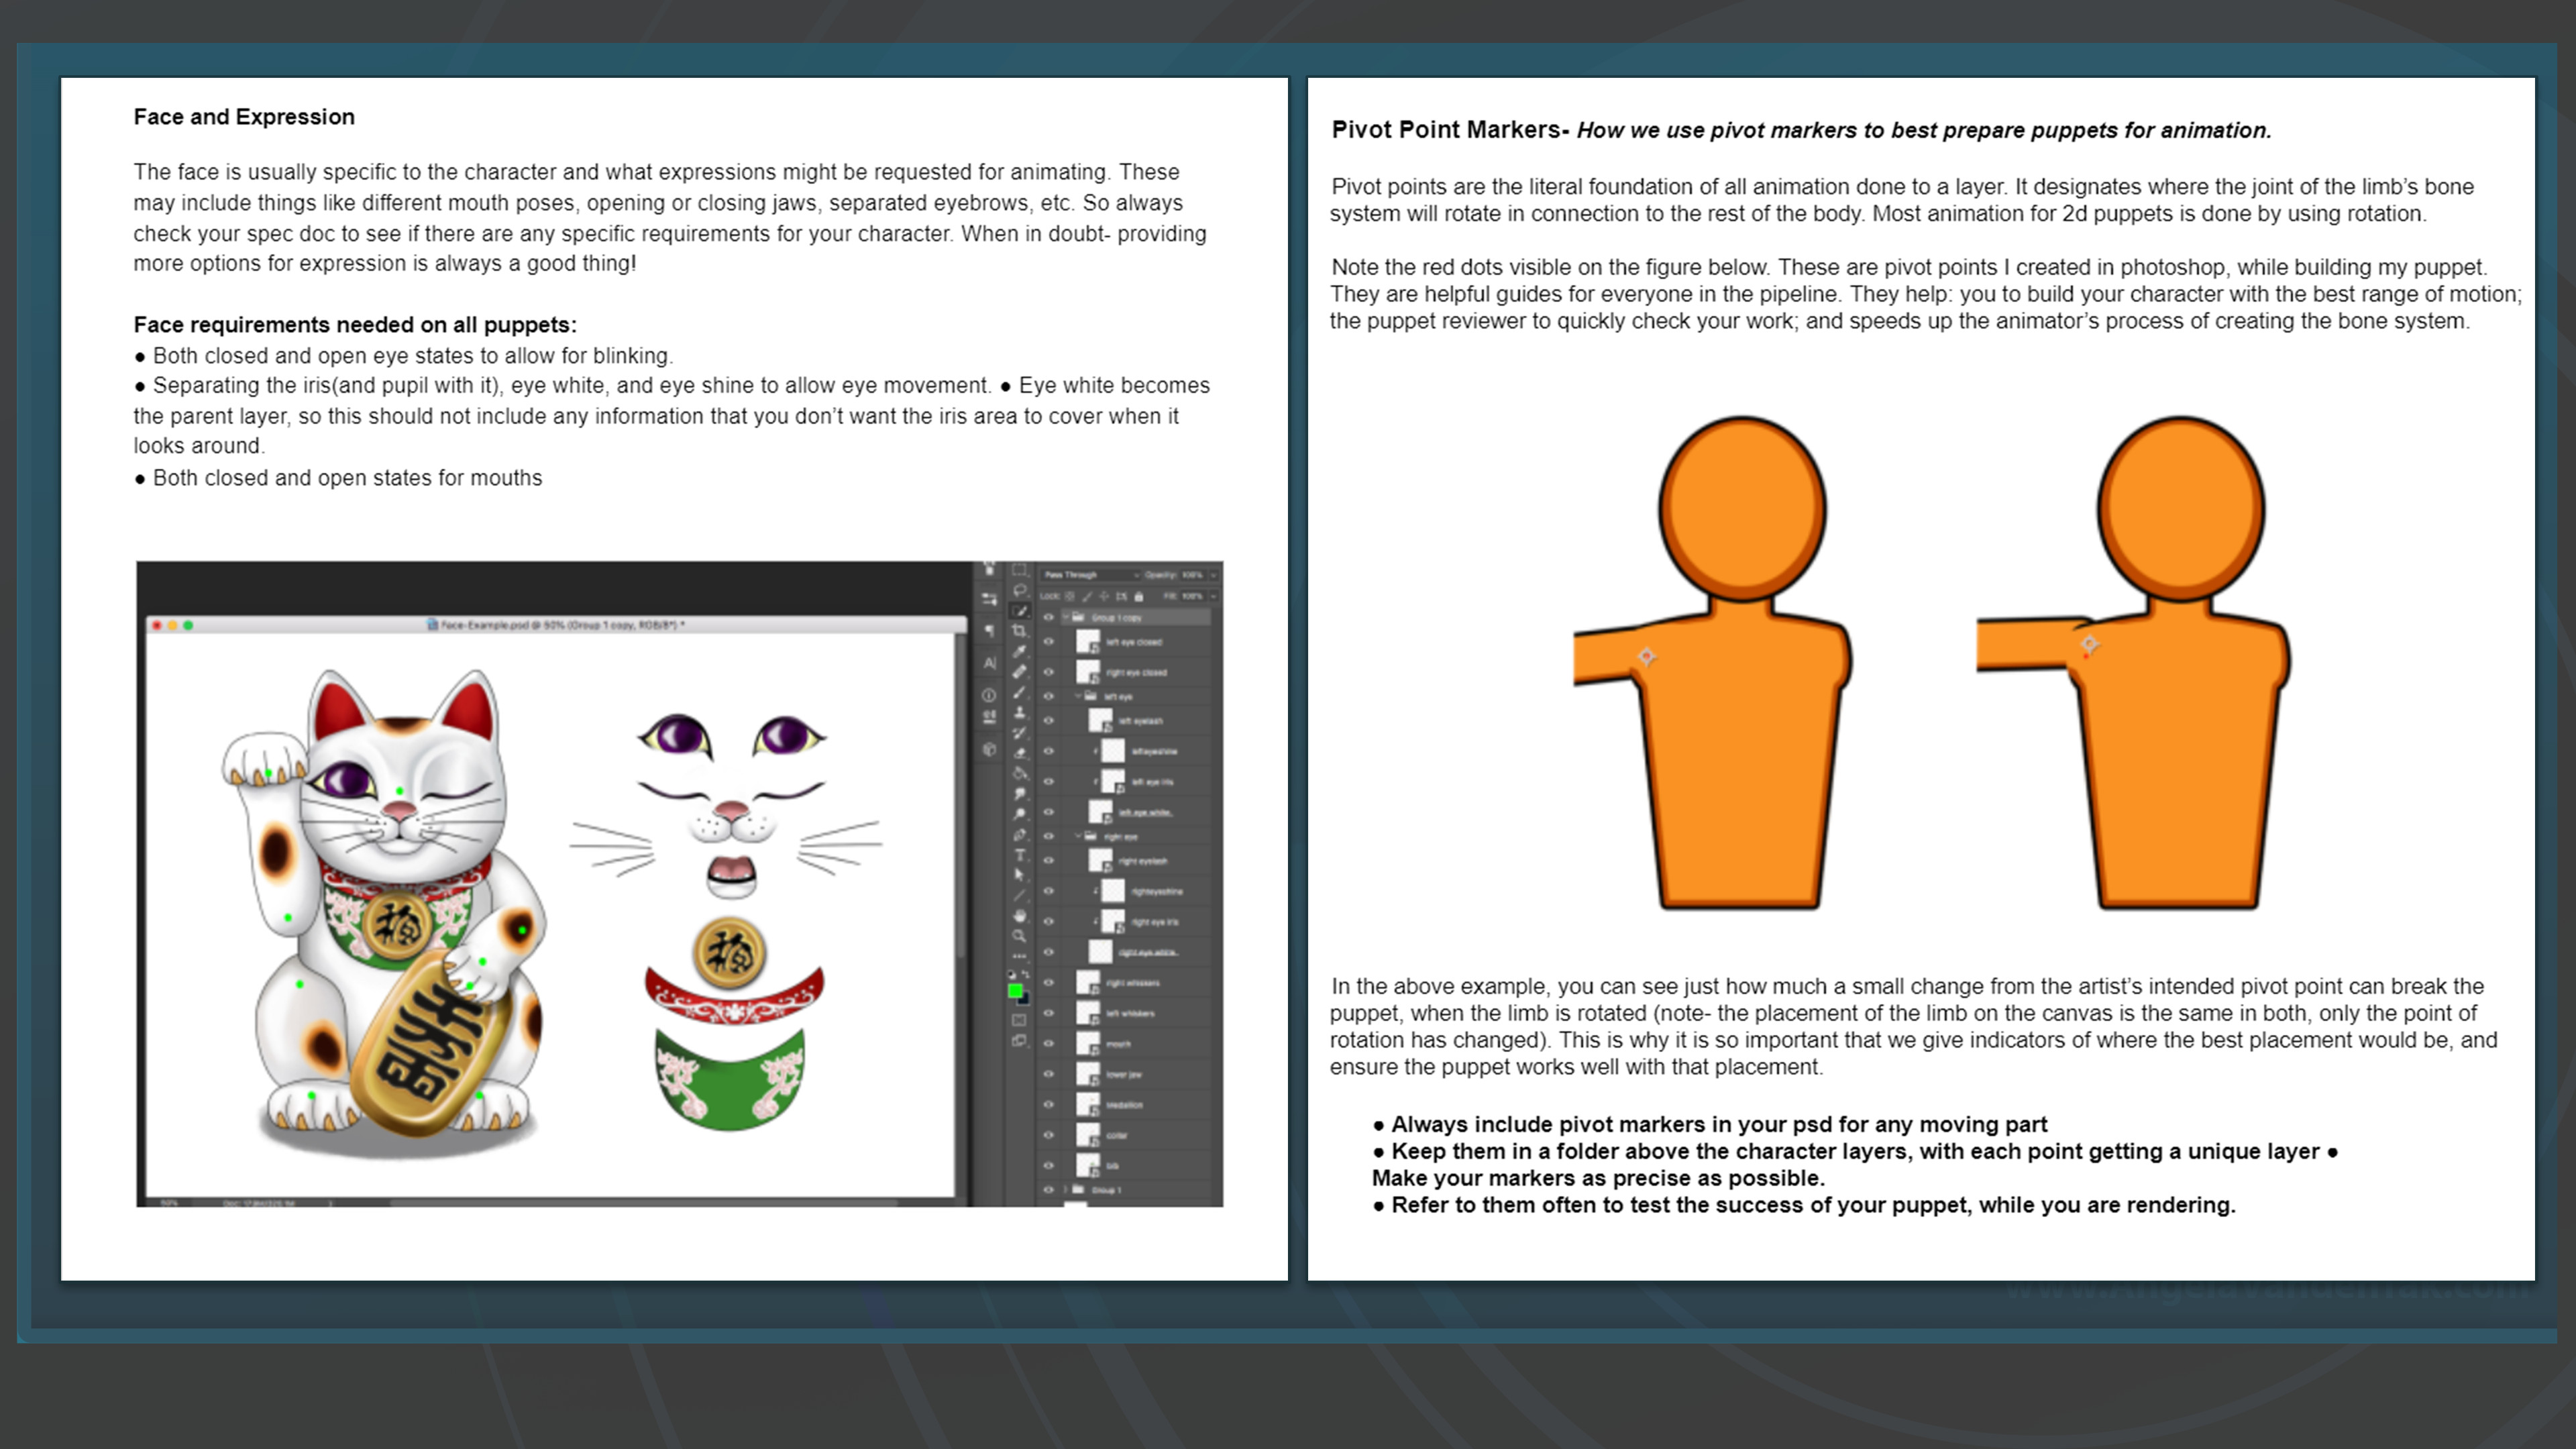 Example pages from Super Free Games' Puppeting Best Practices onboarding document.